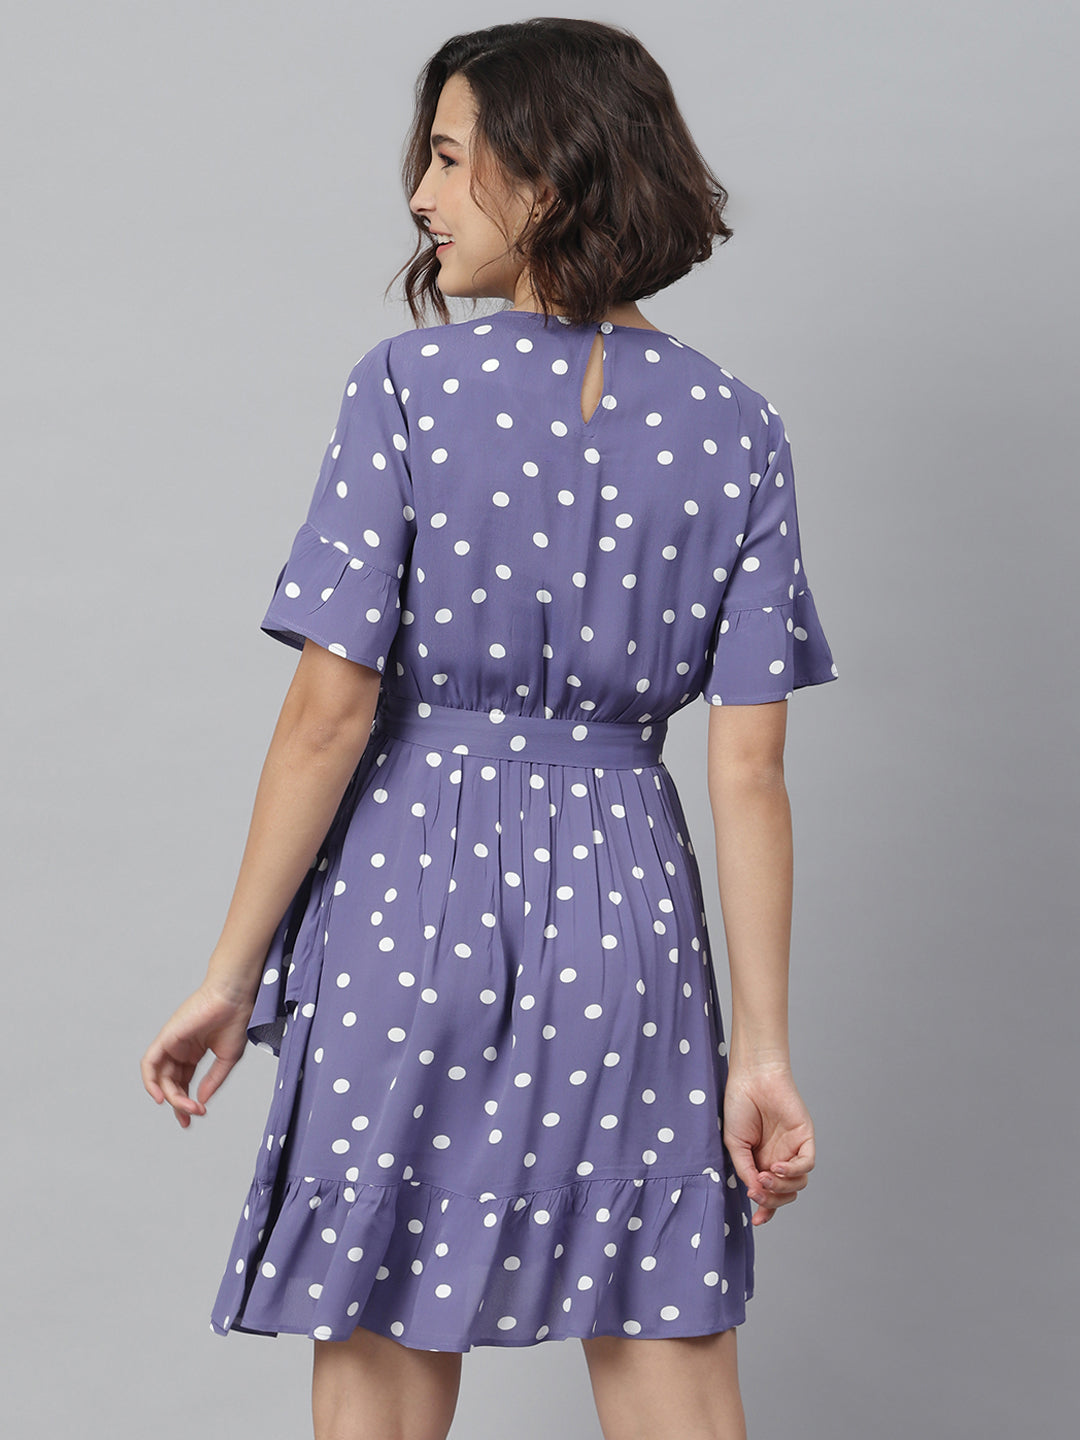 Women's Lavender Polka Dress with Lace detail